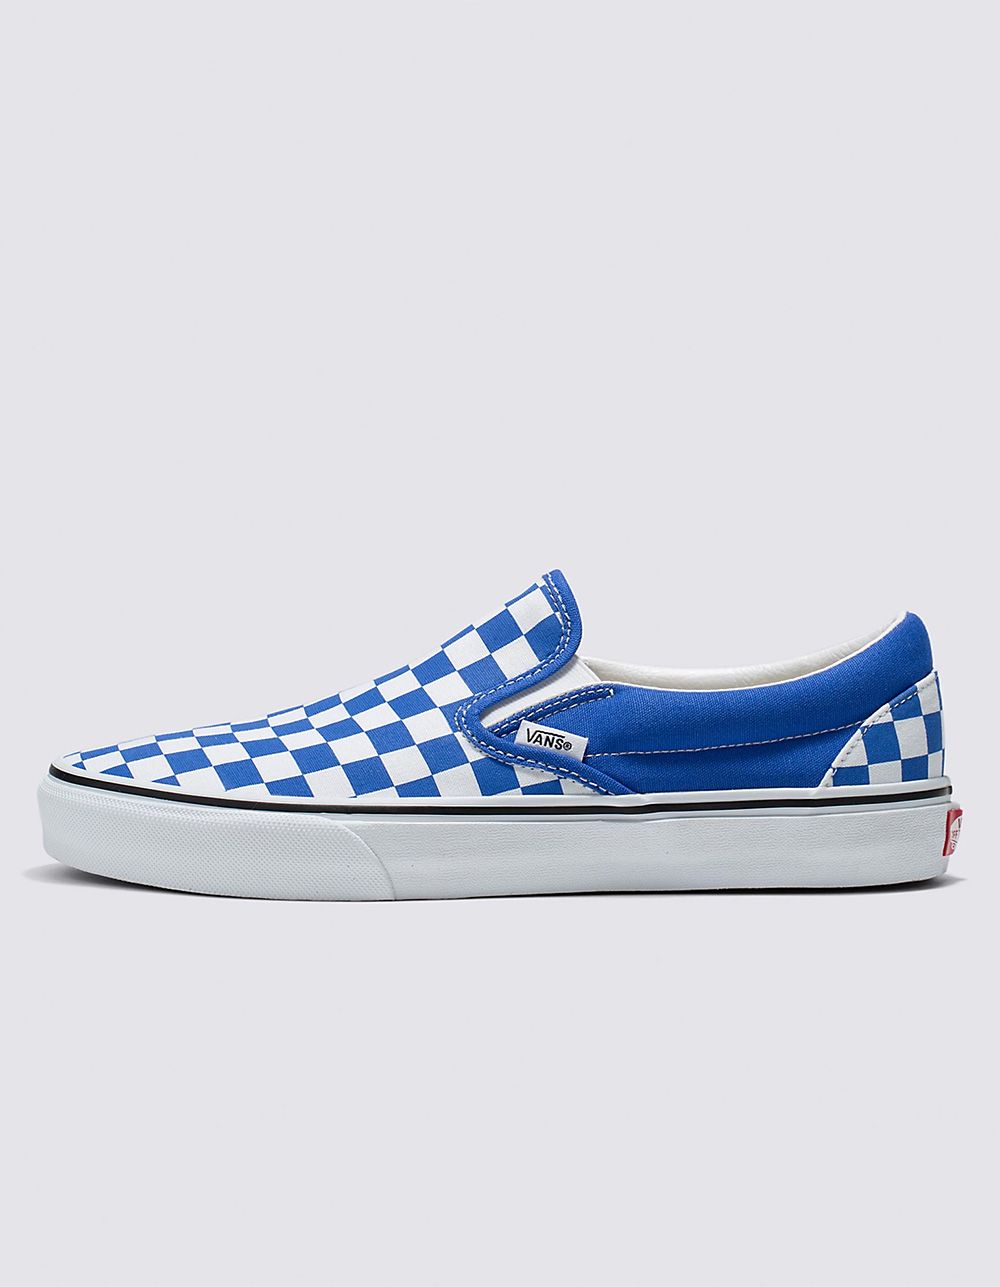 VANS Checkerboard Classic Mens Slip-On Shoes - BLUE/WHT | Tillys